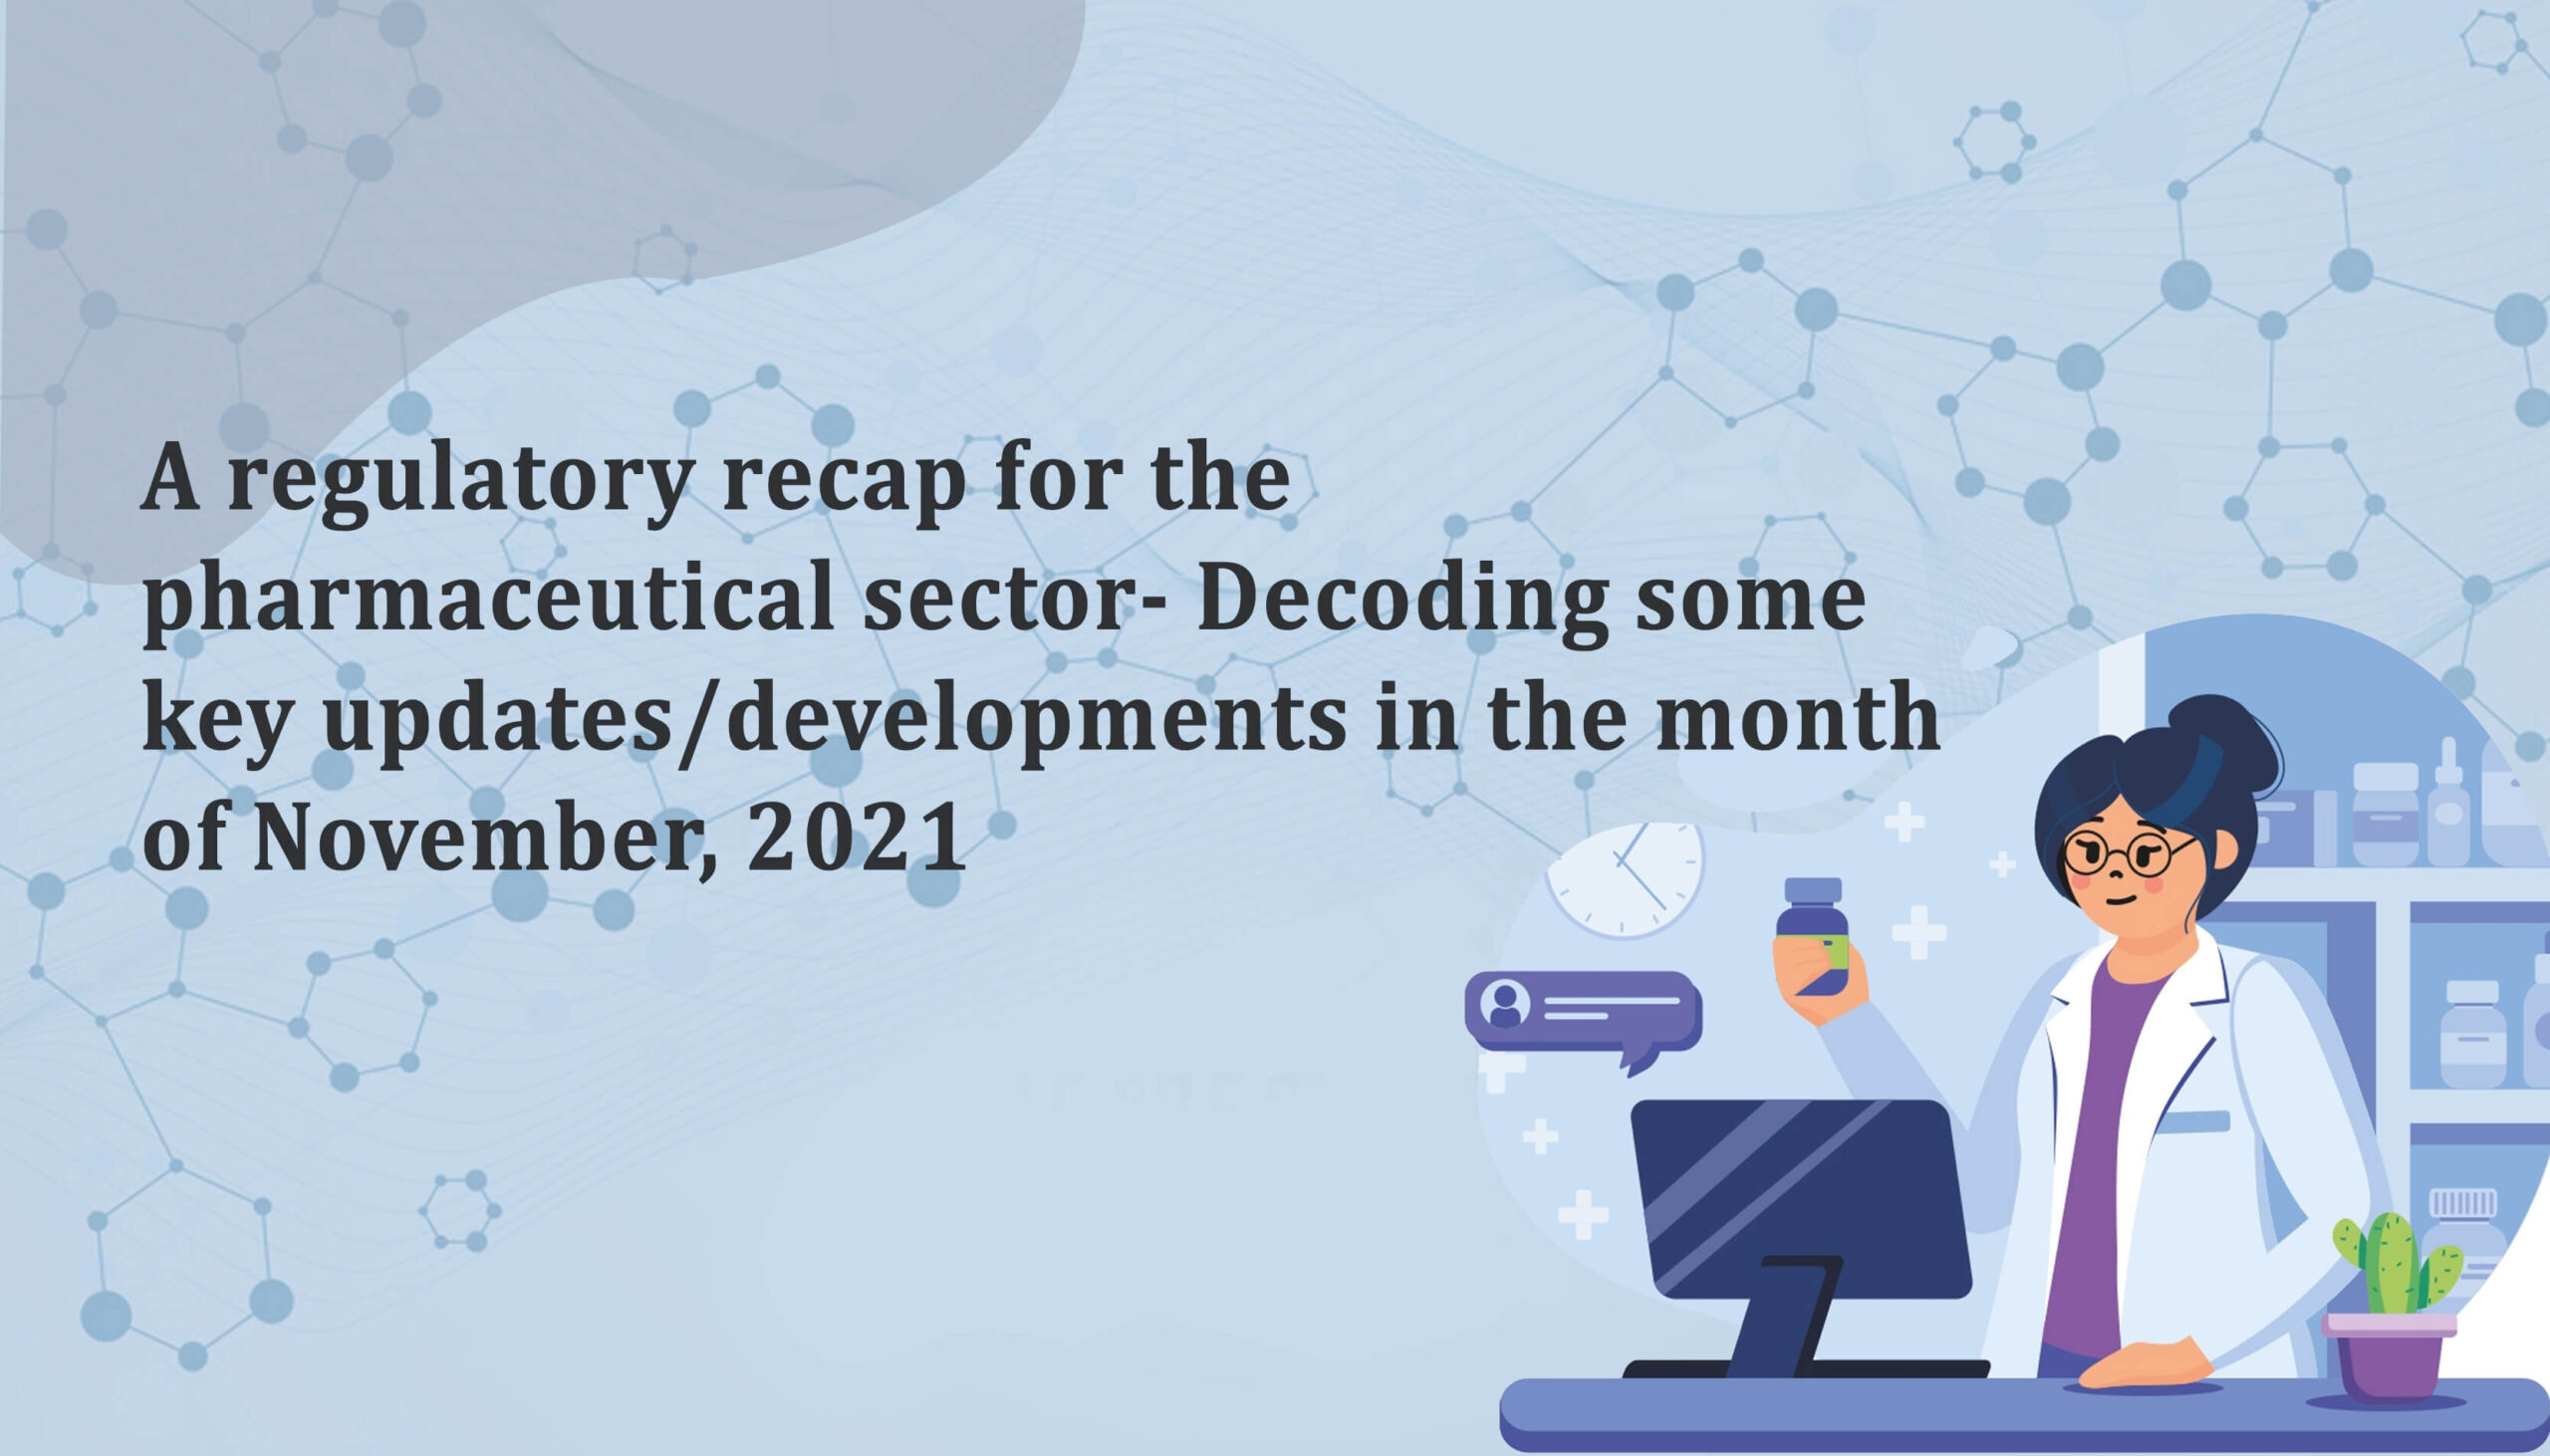 A regulatory recap for the Pharmaceutical Sector- Decoding some key updates/developments in the month of November, 2021